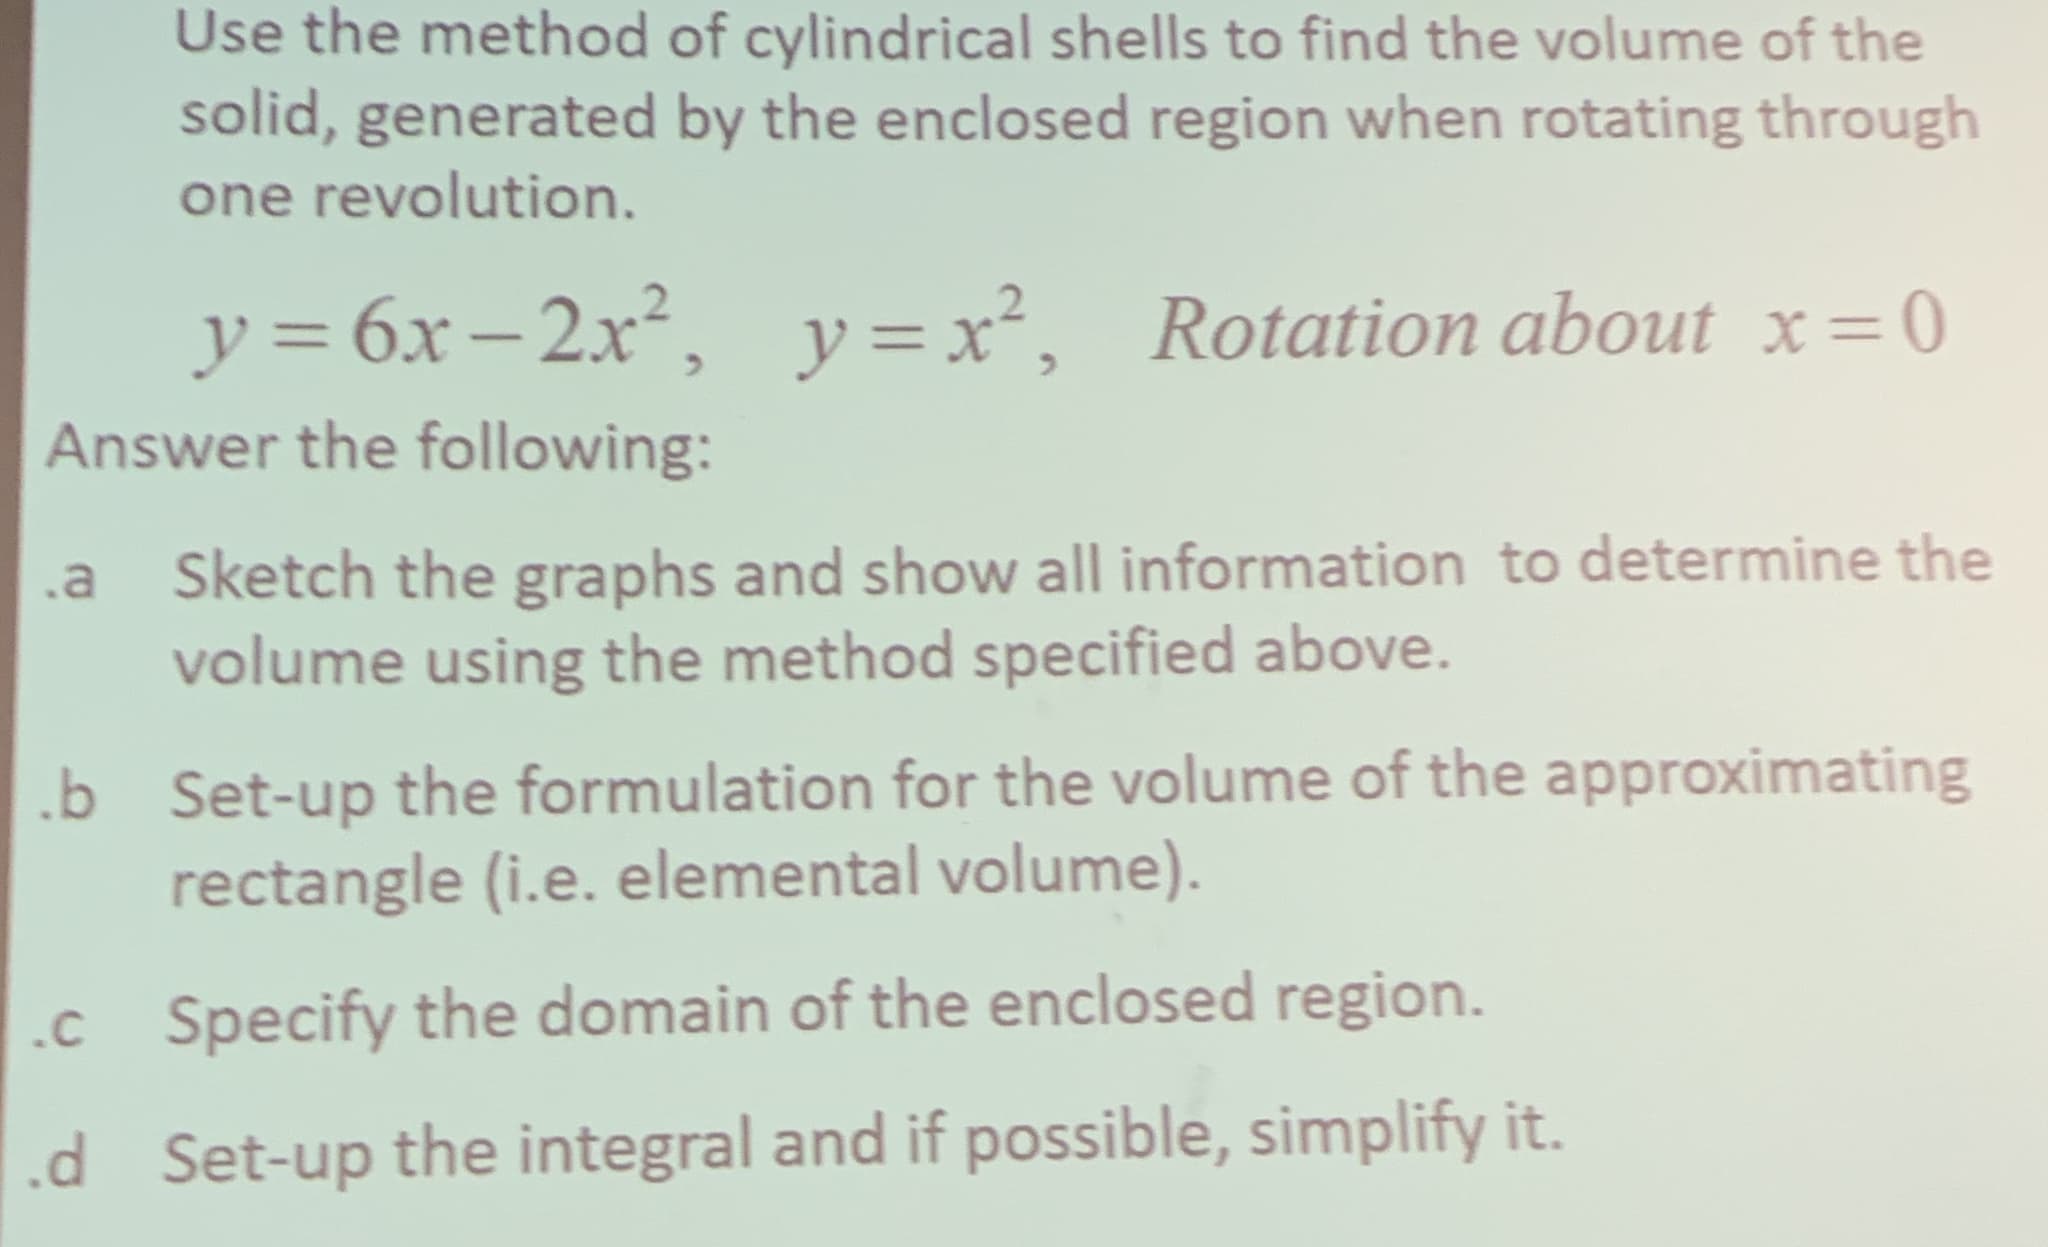 Use the method of cylindrical shells to find the volume of the
solid, generated by the enclosed region when rotating through
one revolution.
y=6x-2x, y=x, Rotation about x-0
Answer the following:
11
11
Sketch the graphs and show all information to determine the
volume using the method specified above.
a
Set-up the formulation for the volume of the approximating
rectangle (i.e. elemental volume).
b
Specify the domain of the enclosed region.
.c
Set-up the integral and if possible, simplify it.
d
